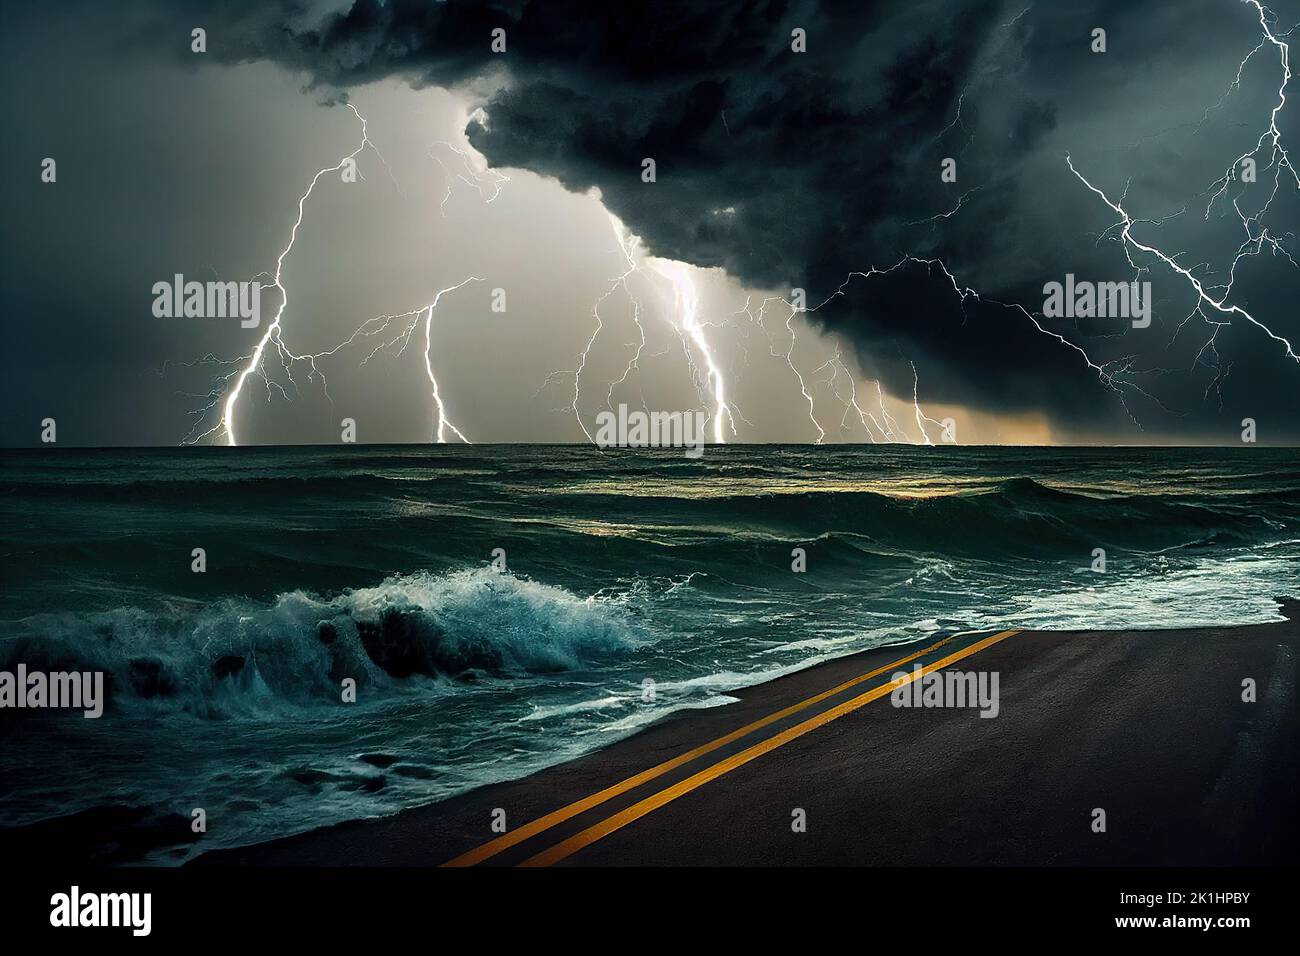 A dangerous tropical storm occurs in a cloudy sky and stormy ocean, caused by the climate change. 3D illustration and digital painting. Stock Photo